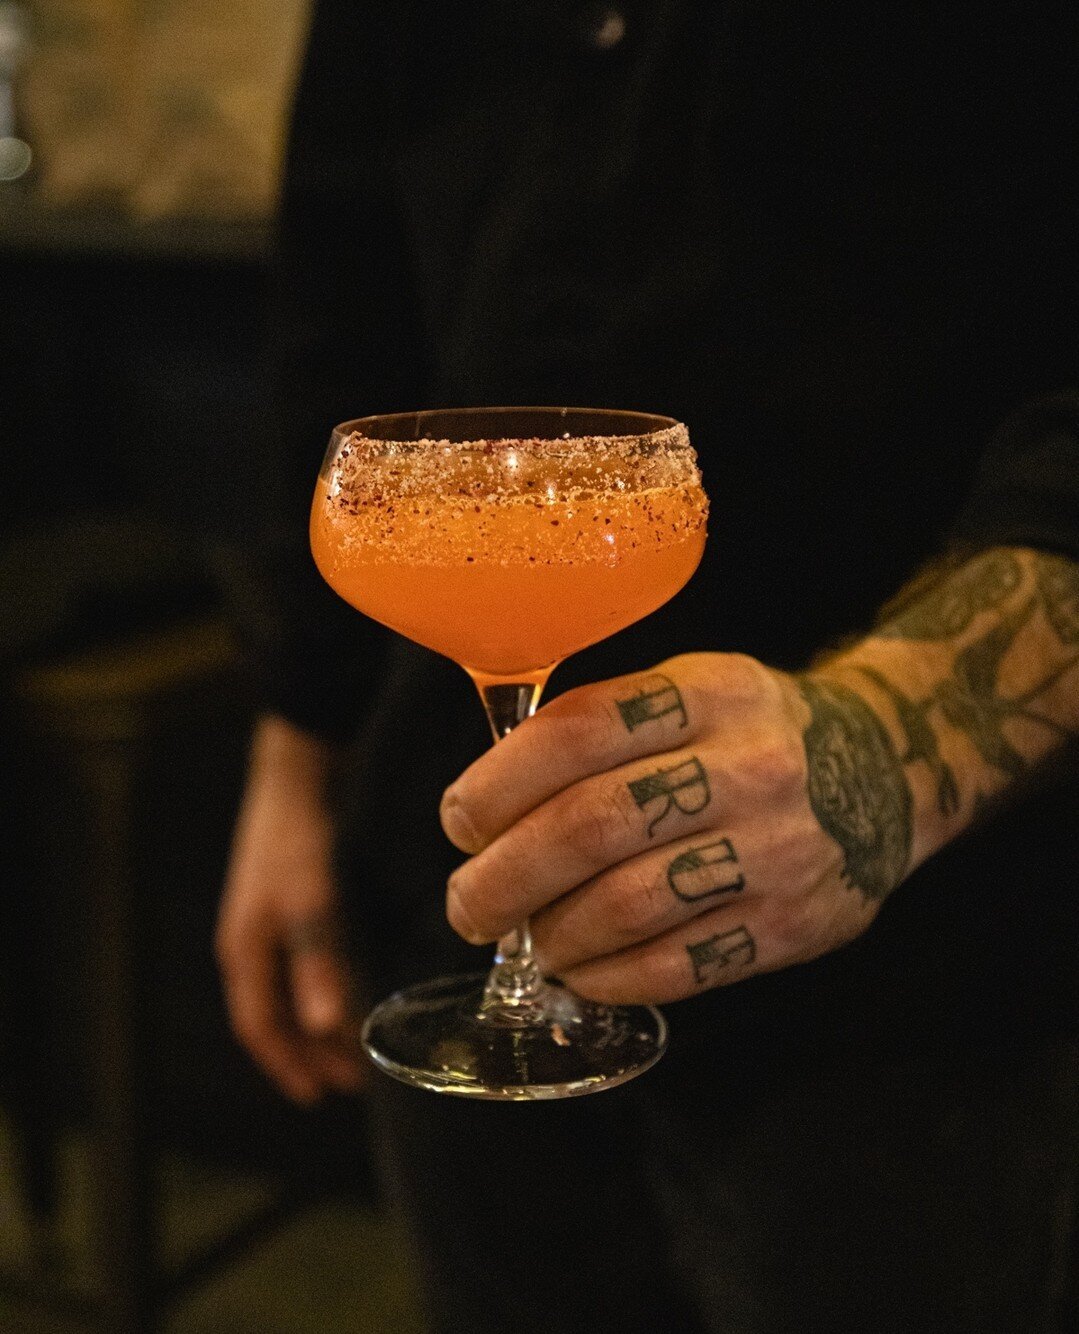 Meet our Community Garden 🌿 ⁠
⁠
Our/New York Basil, Muddled Heirloom Tomatoes, Lime, Thyme, &amp; Simple Syrup 🤩 ⁠
⁠
Taste it for yourself! We're open 5pm-12am 😌⁠
.⁠
.⁠
.⁠
.⁠
#ournewyork #ournewyorkbbar #ournewyorkvodka #newyorkbar #cocktails #new